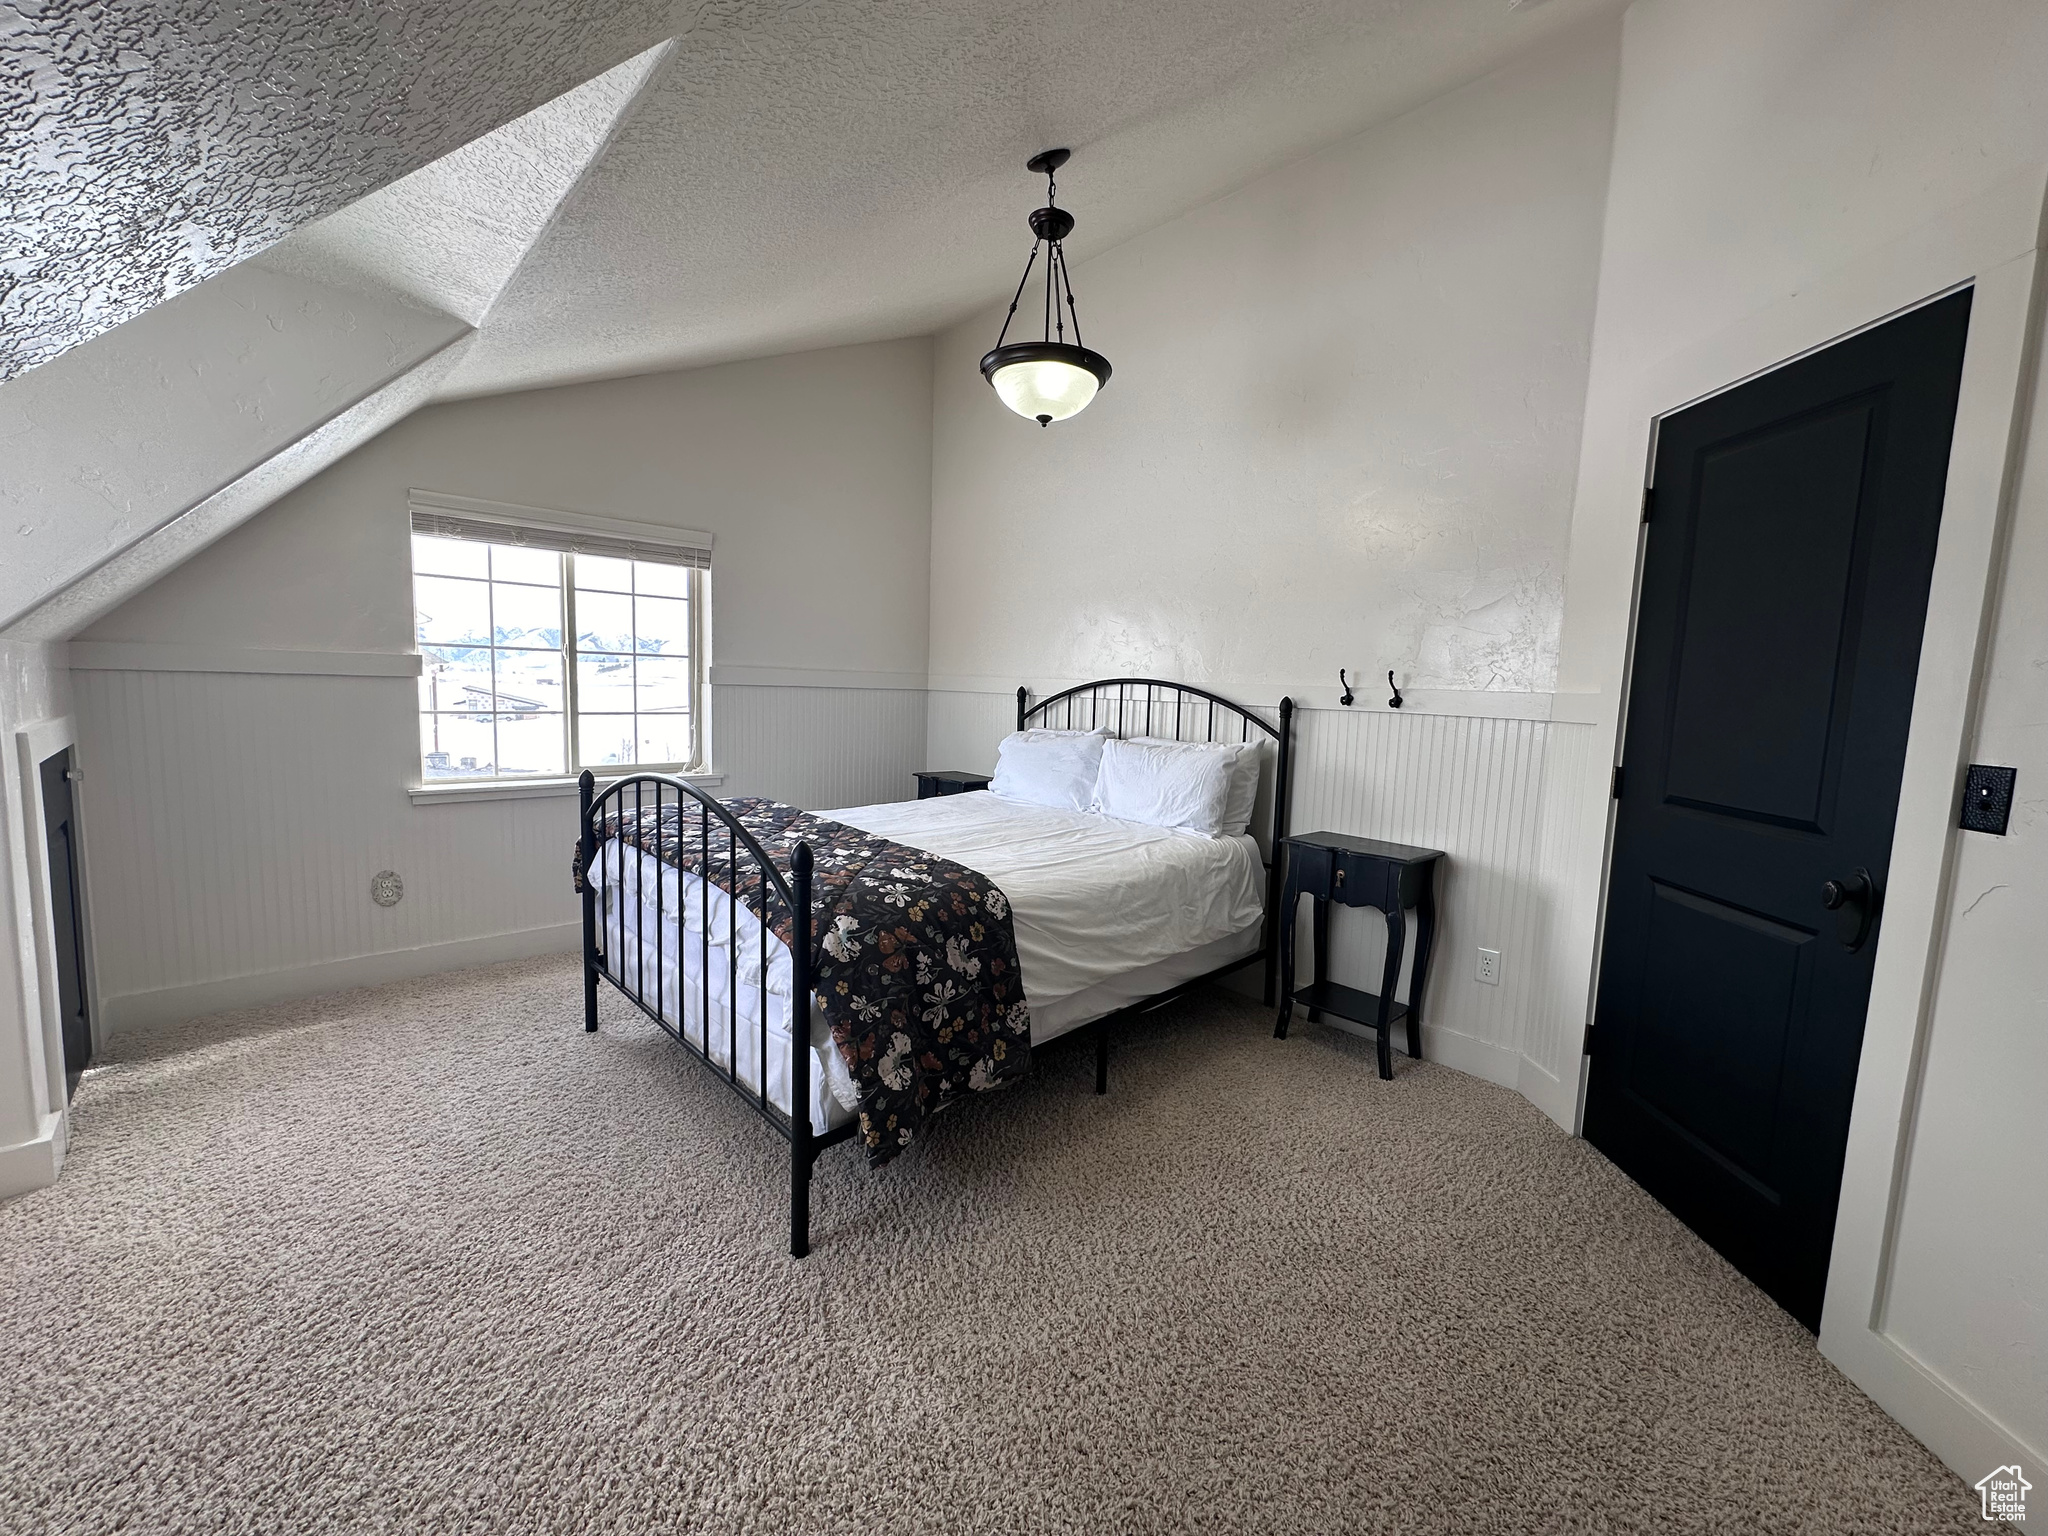 Carpeted bedroom with a  lofted ceiling